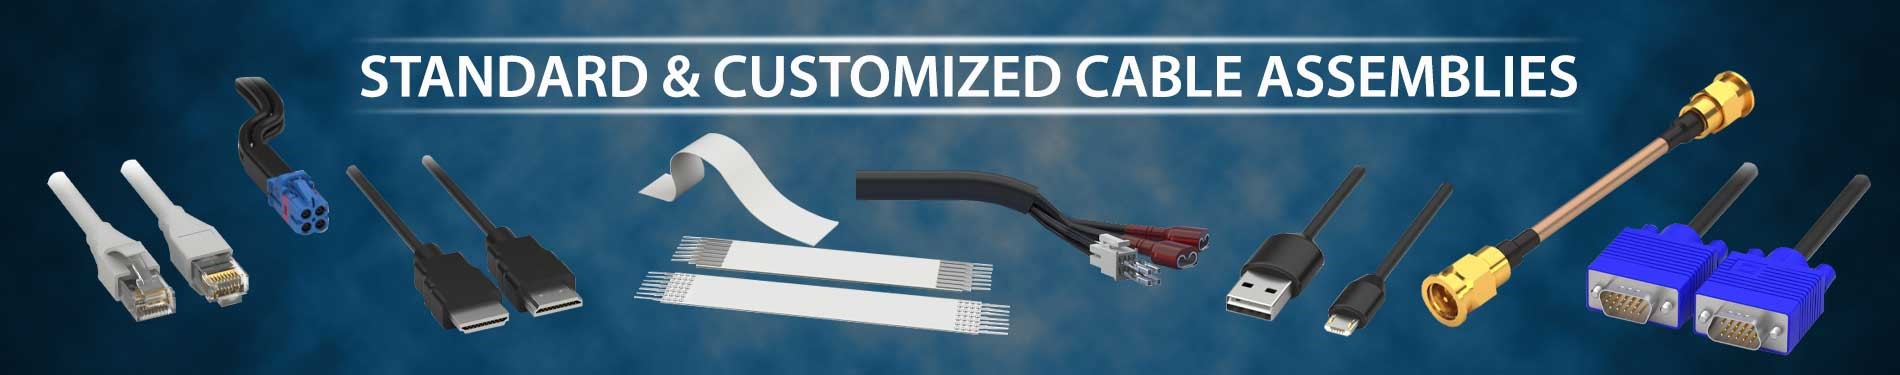 Standard & Customized Cable Assemblies